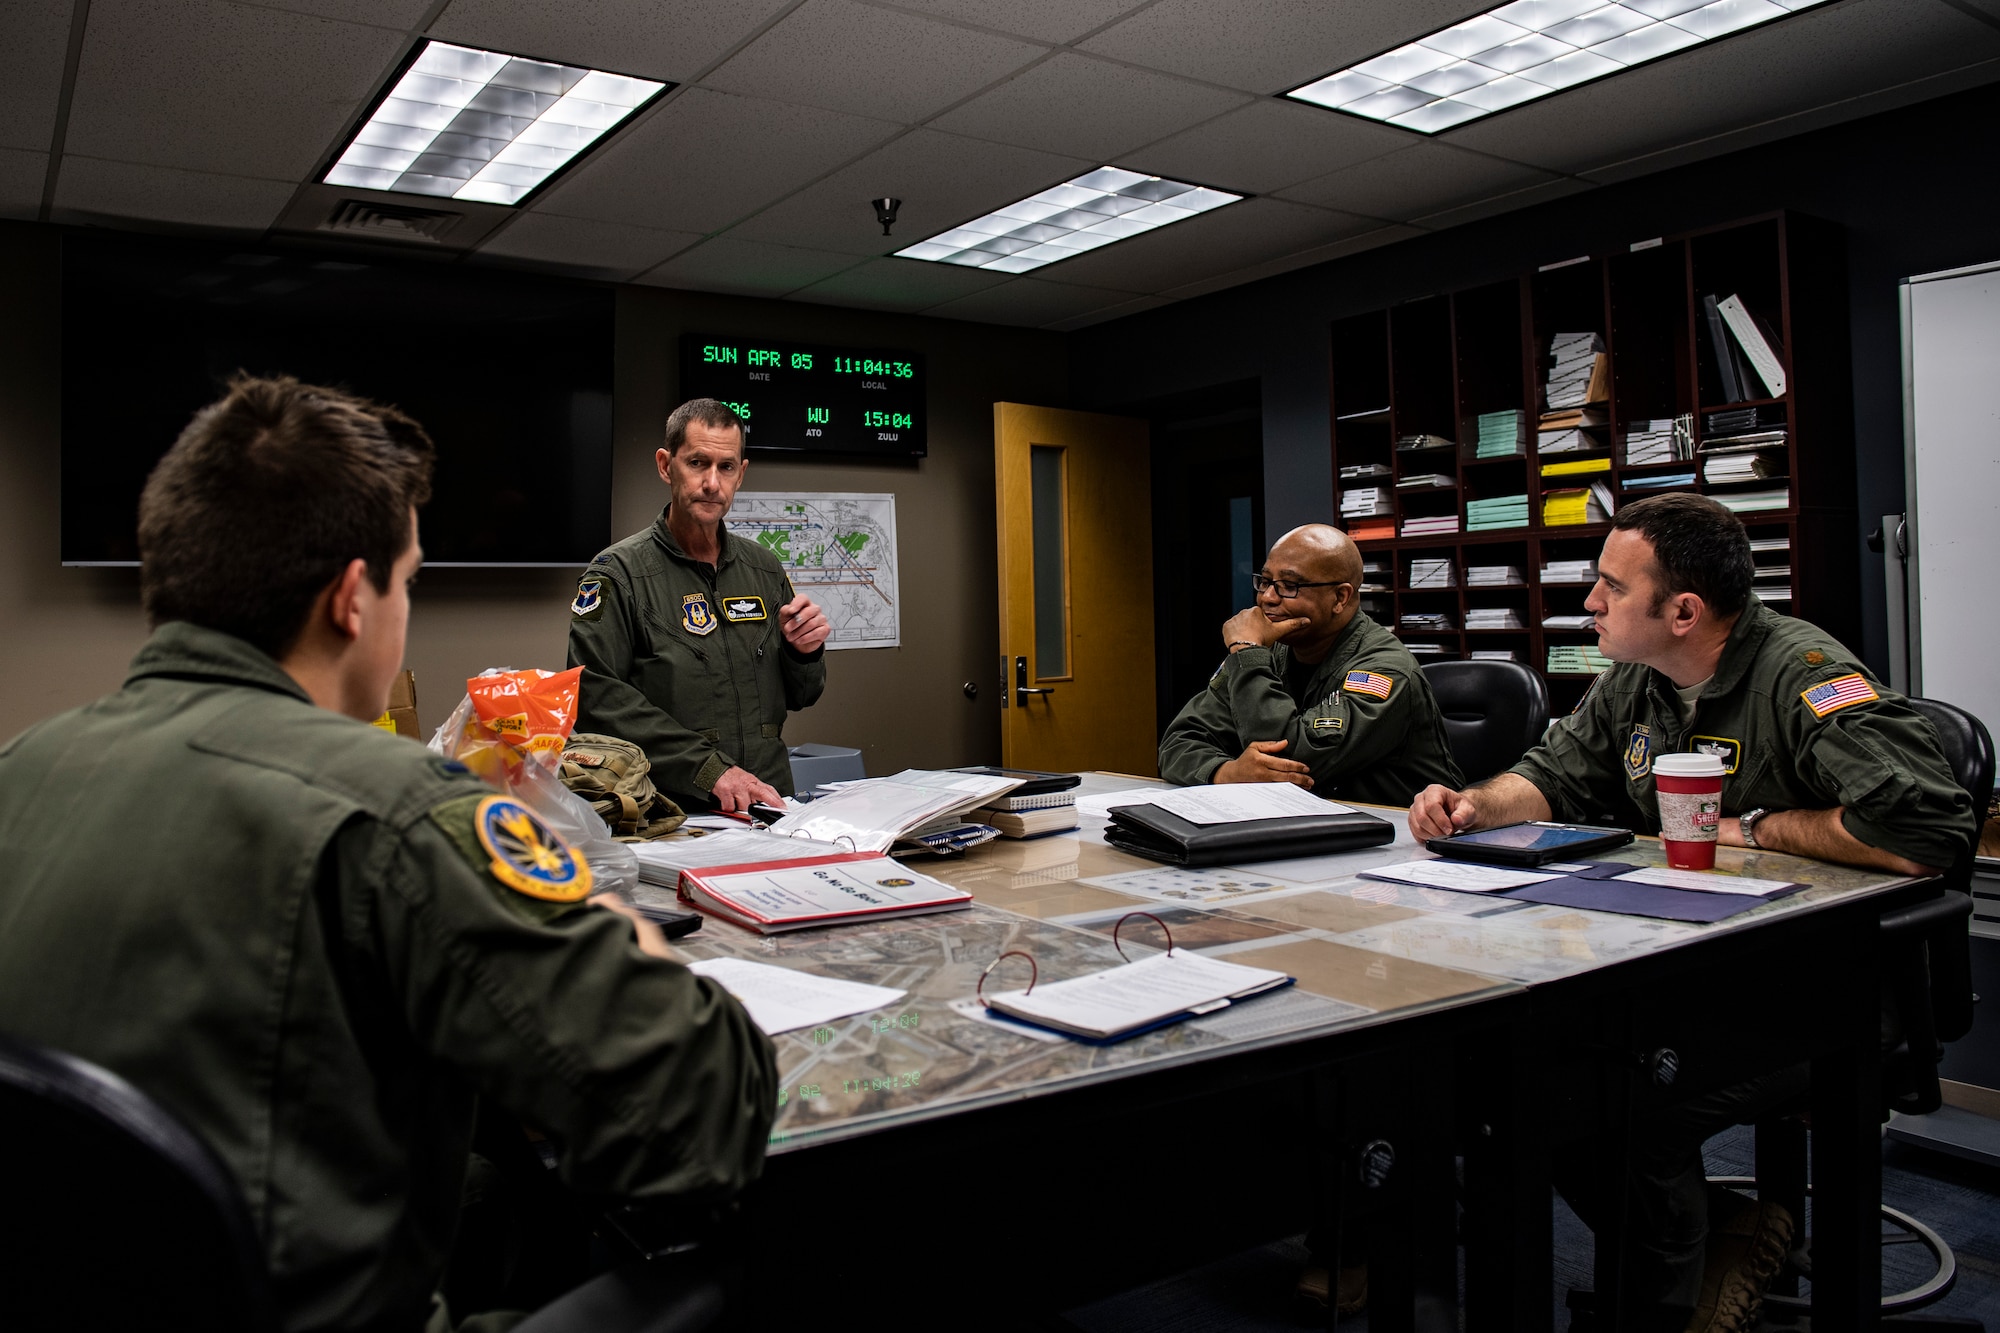 Col. John F. Robinson, 911th Airlift Wing commander, talks with other aircrew members at the Pittsburgh International Airport Air Reserve Station, Pennsylvania before transporting mobilized Airmen to Joint Base Mcguire-Dix-Lakehurst in support of the COVID-19 efforts, April 5, 2020.